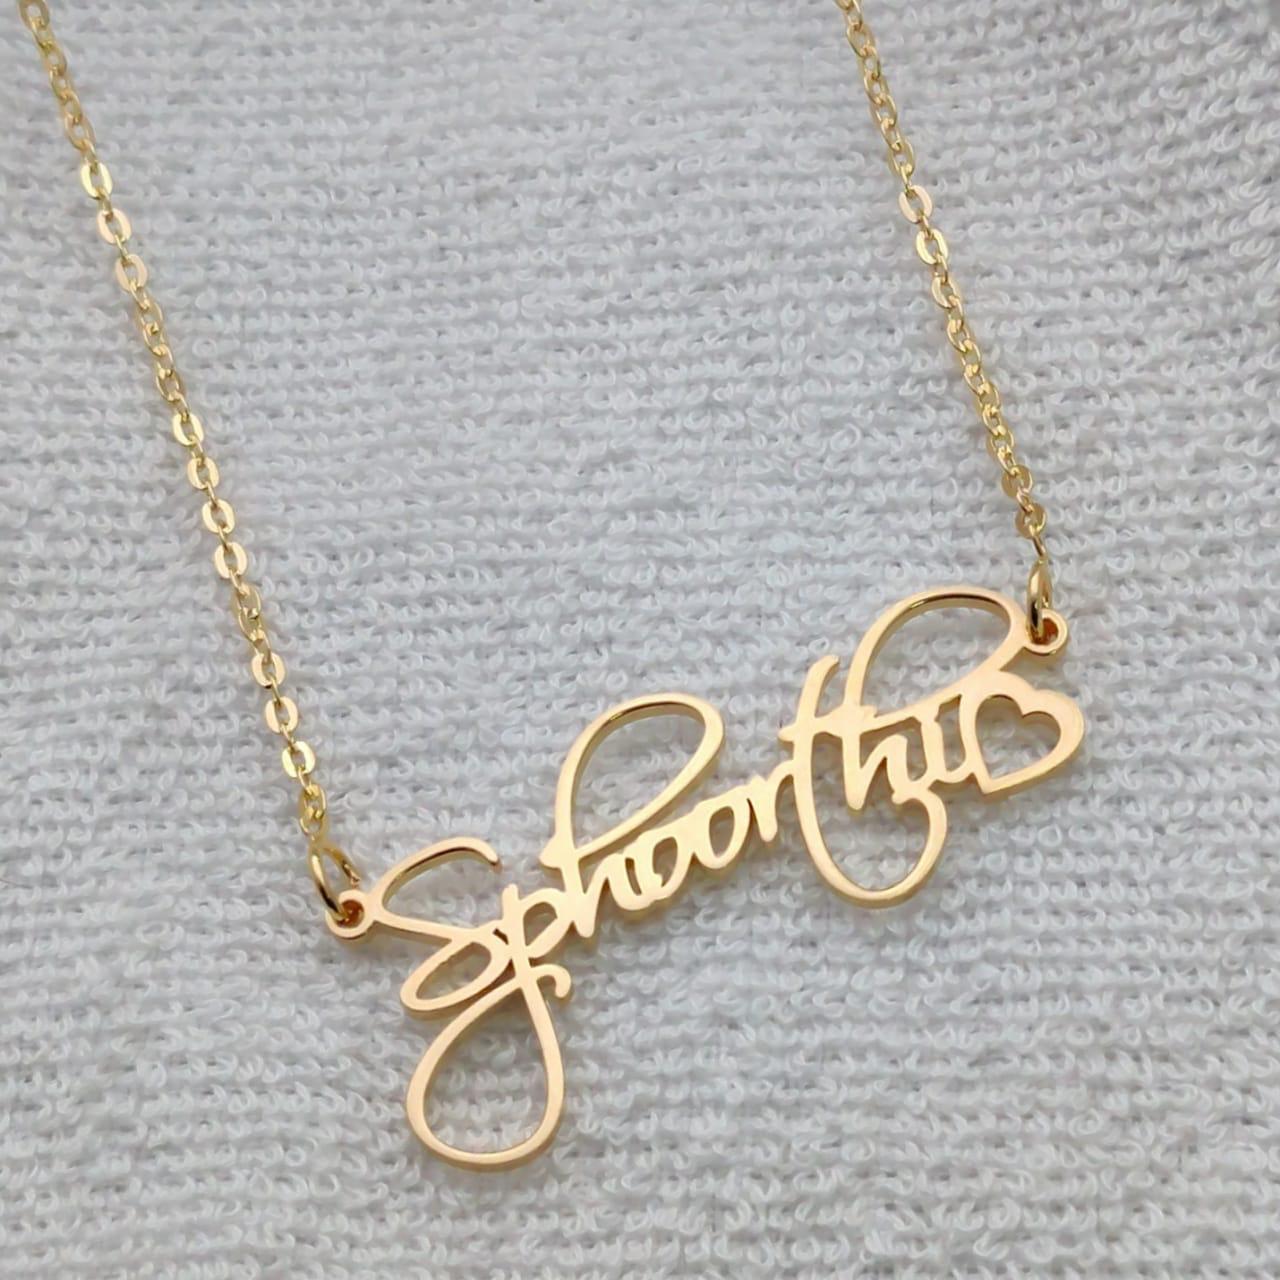 Customized Metal Necklace - Personalized Cursive Name Necklace ...